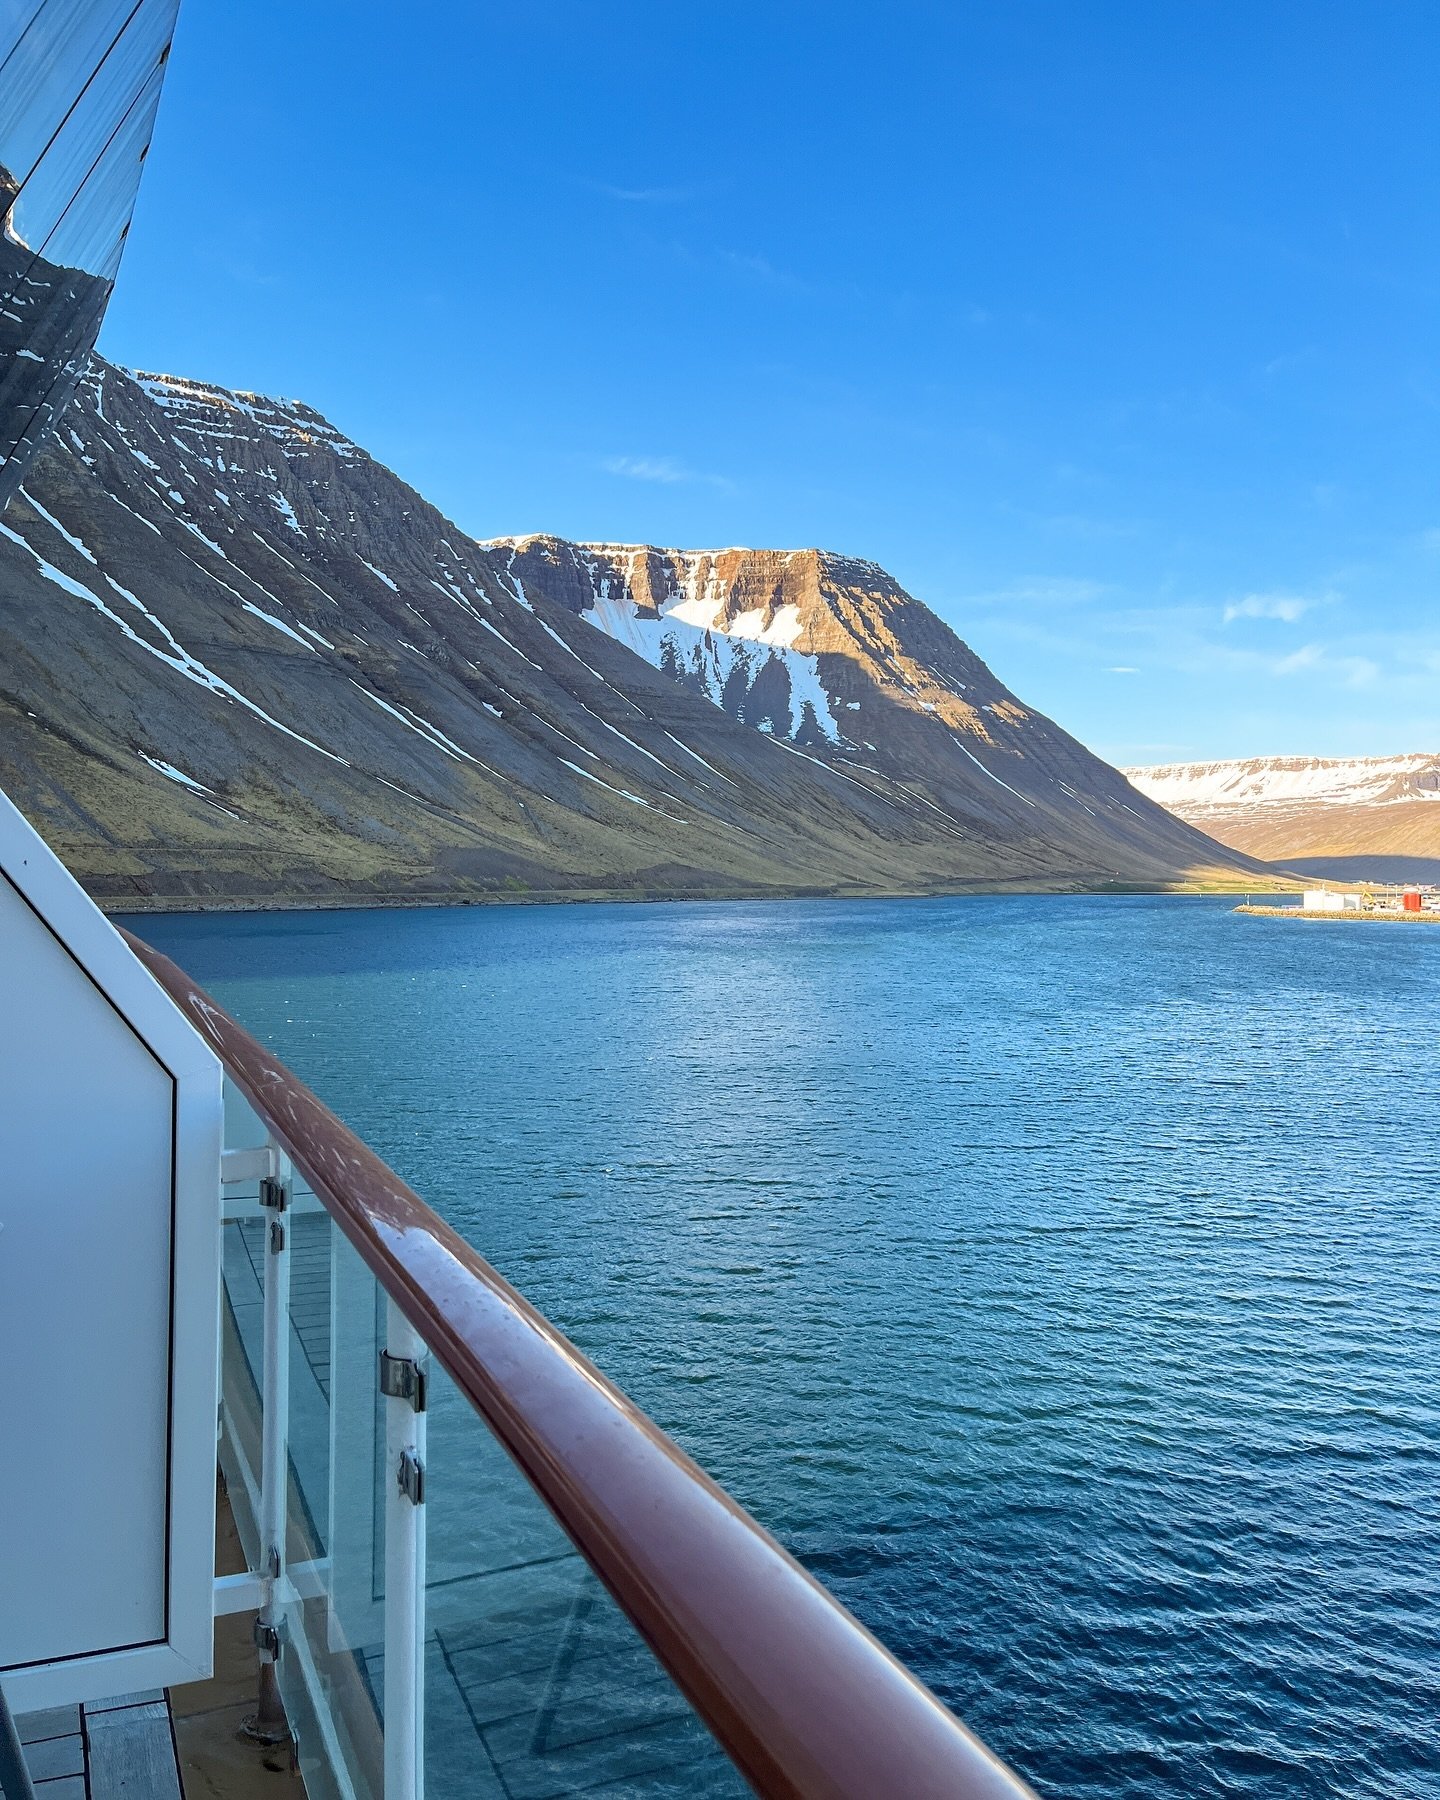 Our first port was &Iacute;safj&ouml;r&eth;ur, where we rented a car through @europcar, a 10-minute walk from the new cruise port. We visited Lambagill Waterfall, the Bolafjall mountain outlook, and the beach in Holt. The entire Westfjords region of 